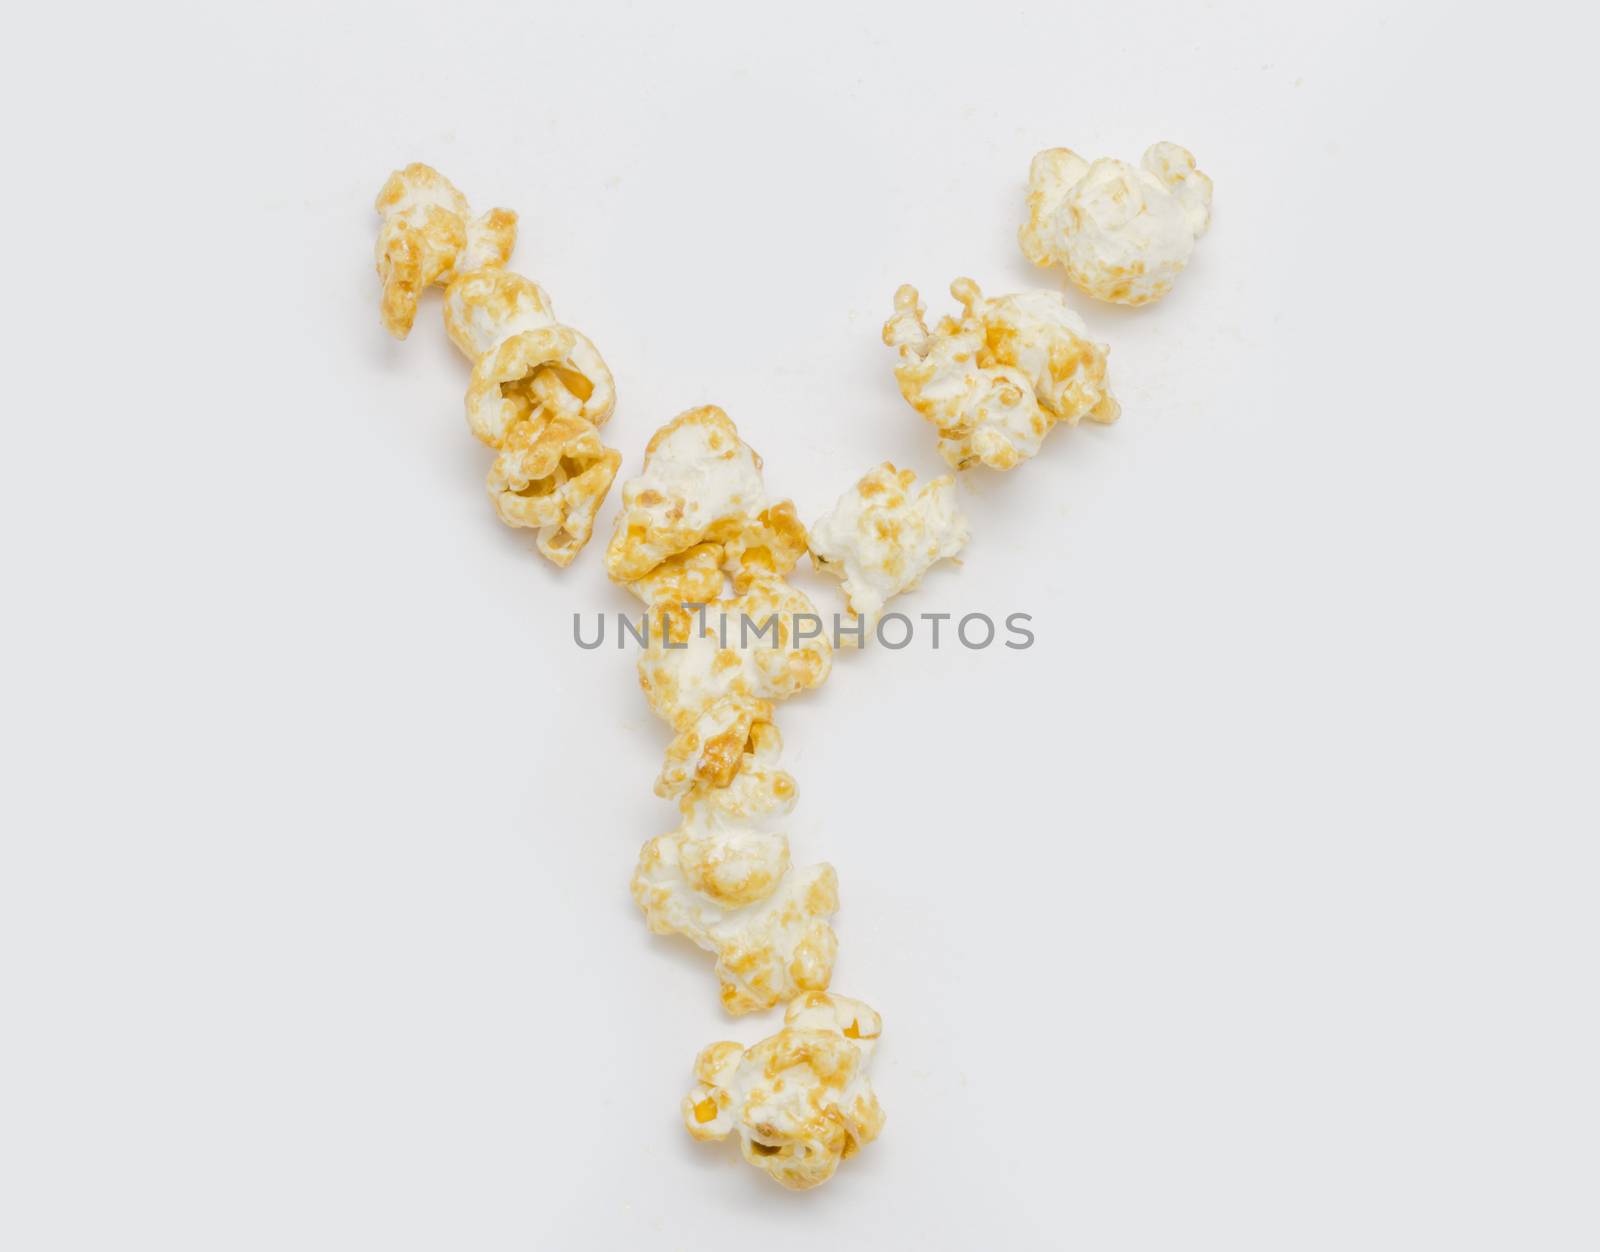 pop corn forming letter Y isolated on white background by chingraph